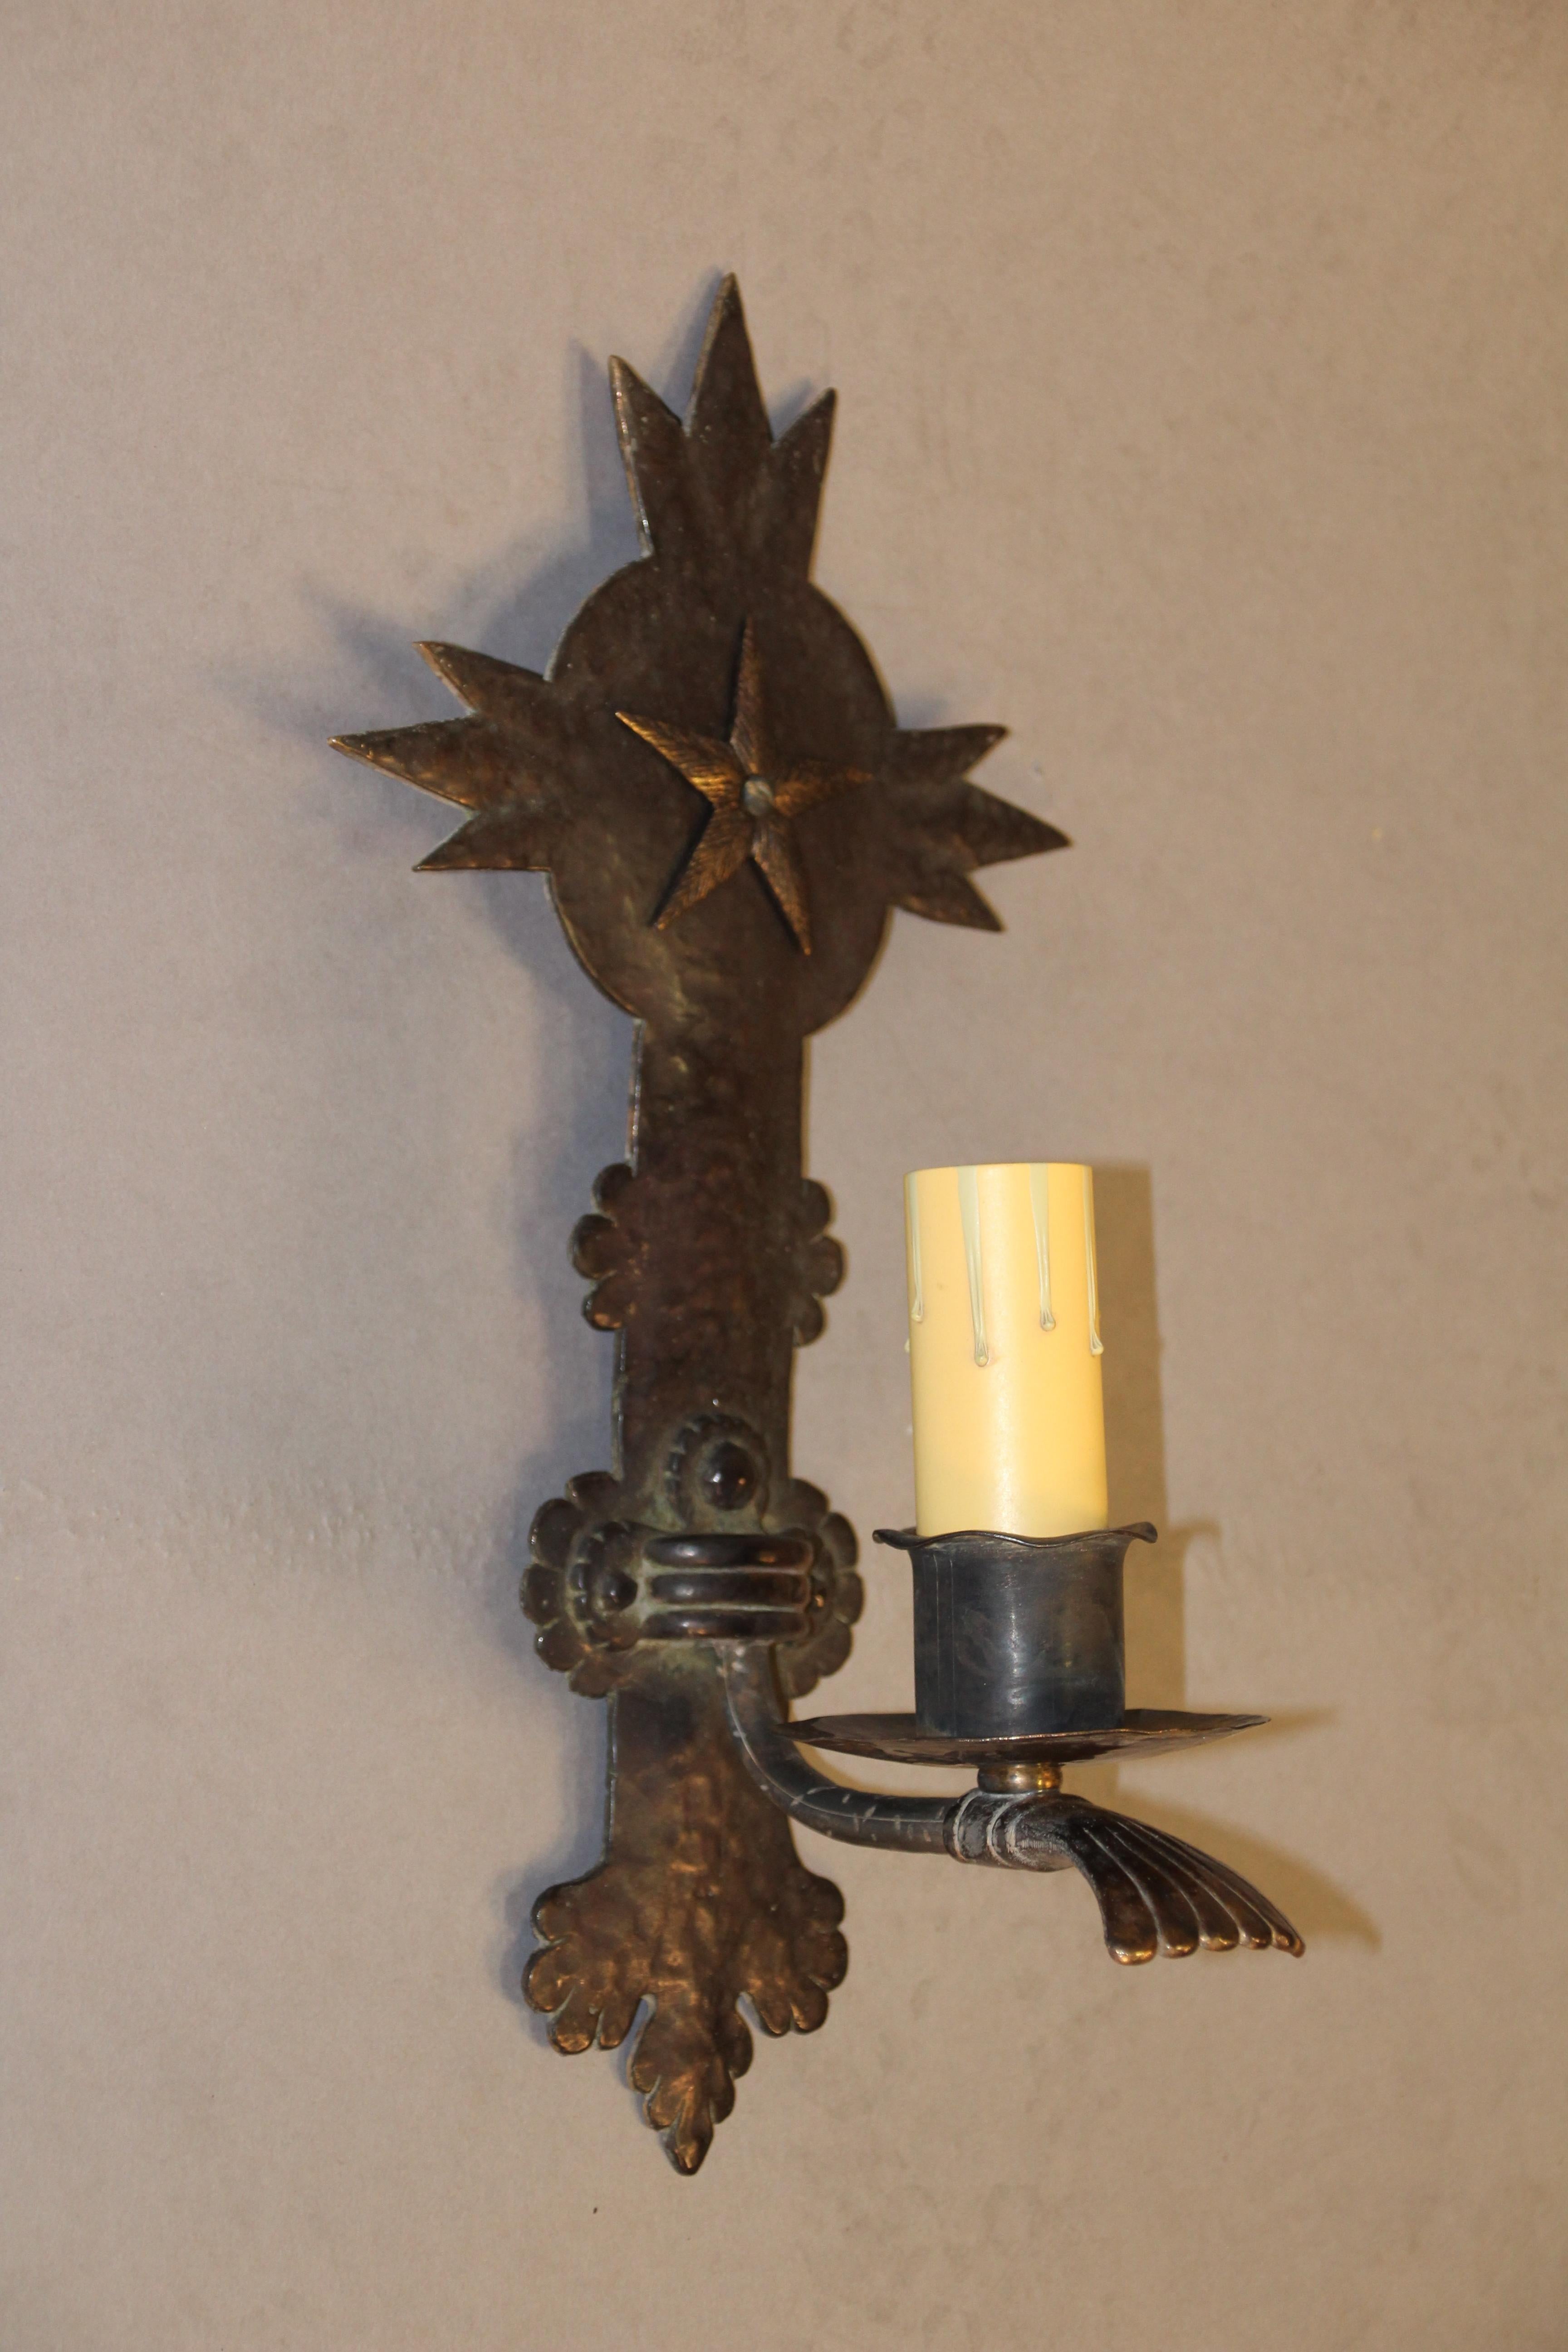 Circa 1920s sconce with star pattern.